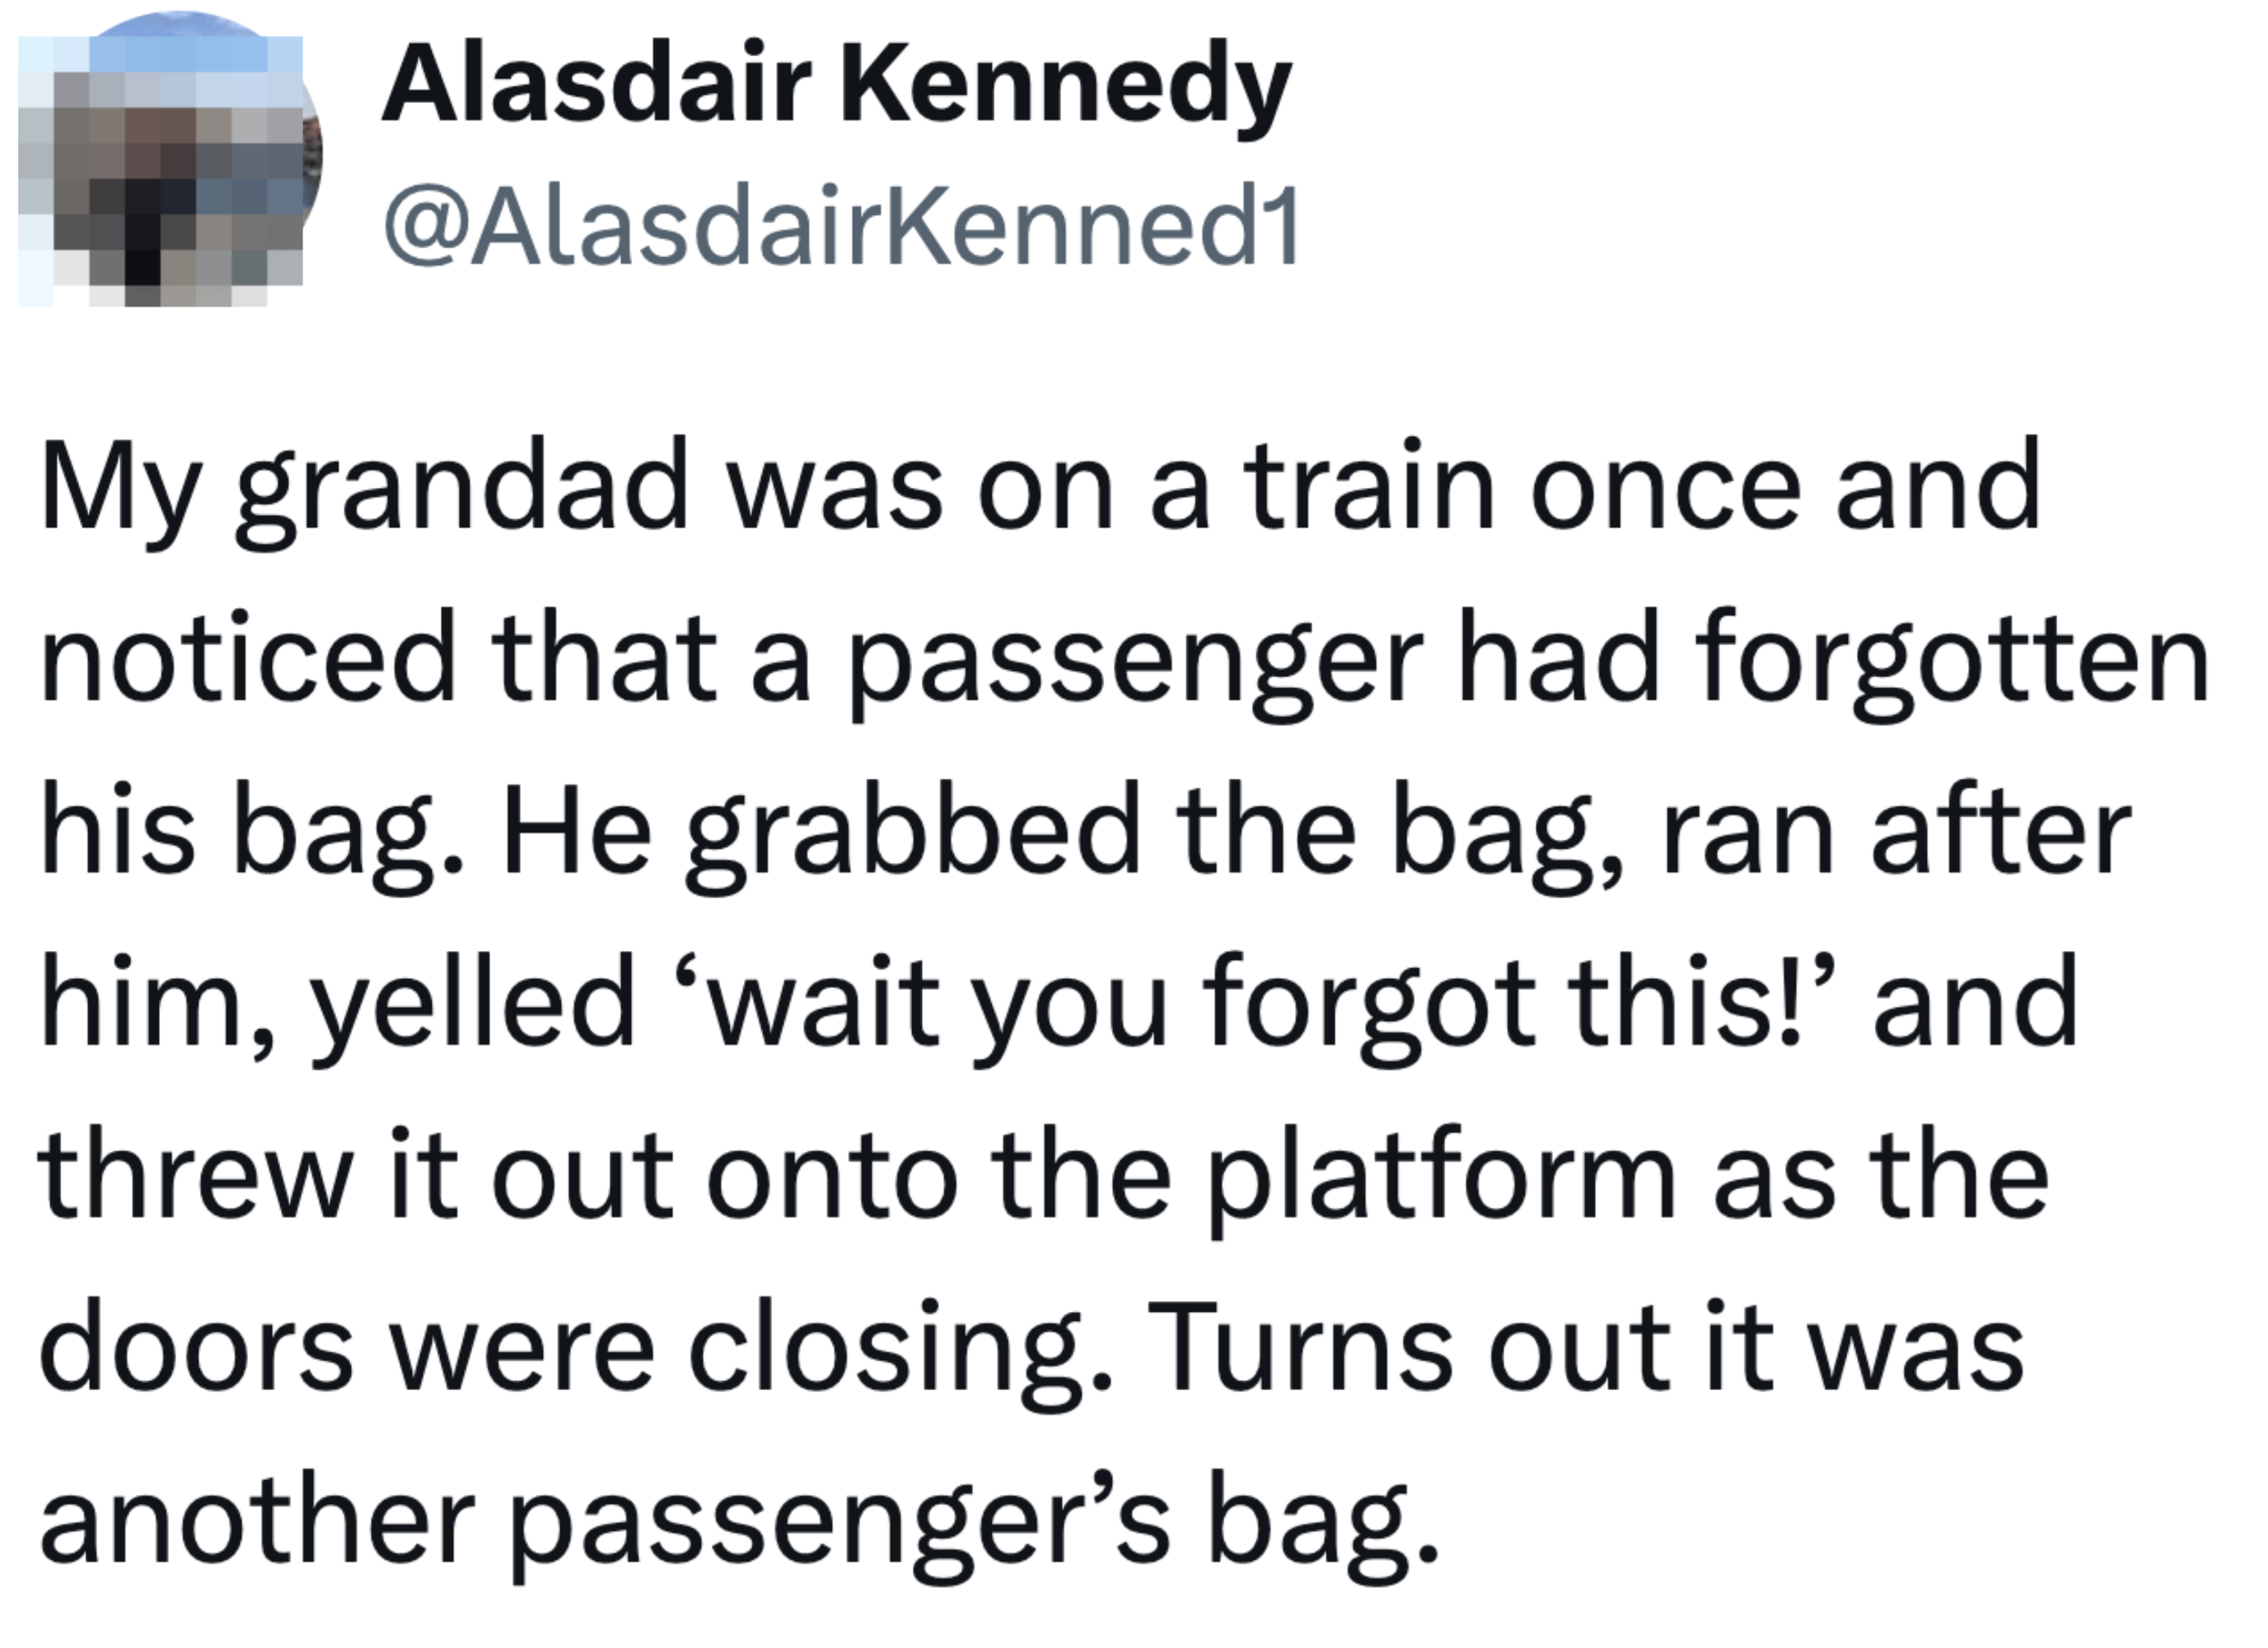 Tweet describing an event where someone threw a forgotten bag onto a train platform as the doors were closing, only to realize it was a bomb scare